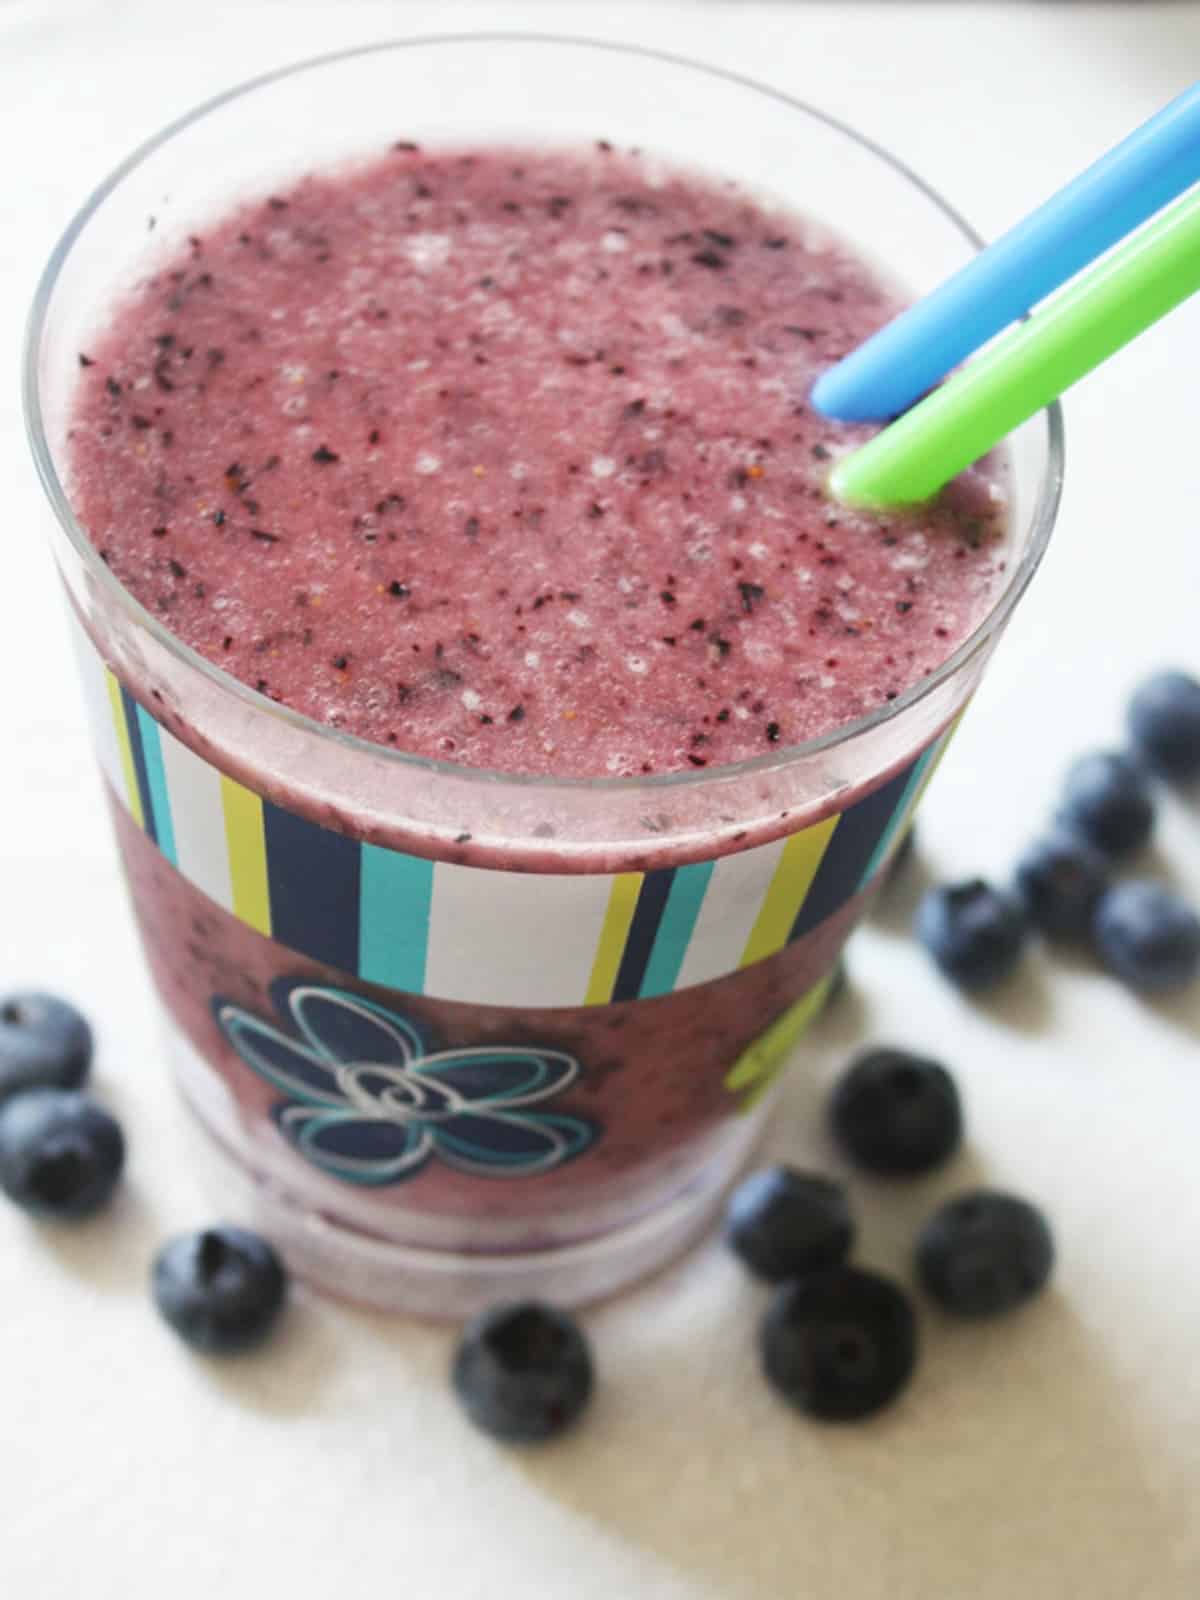 A banana blueberry peanut butter smoothie in a glass with two straws.